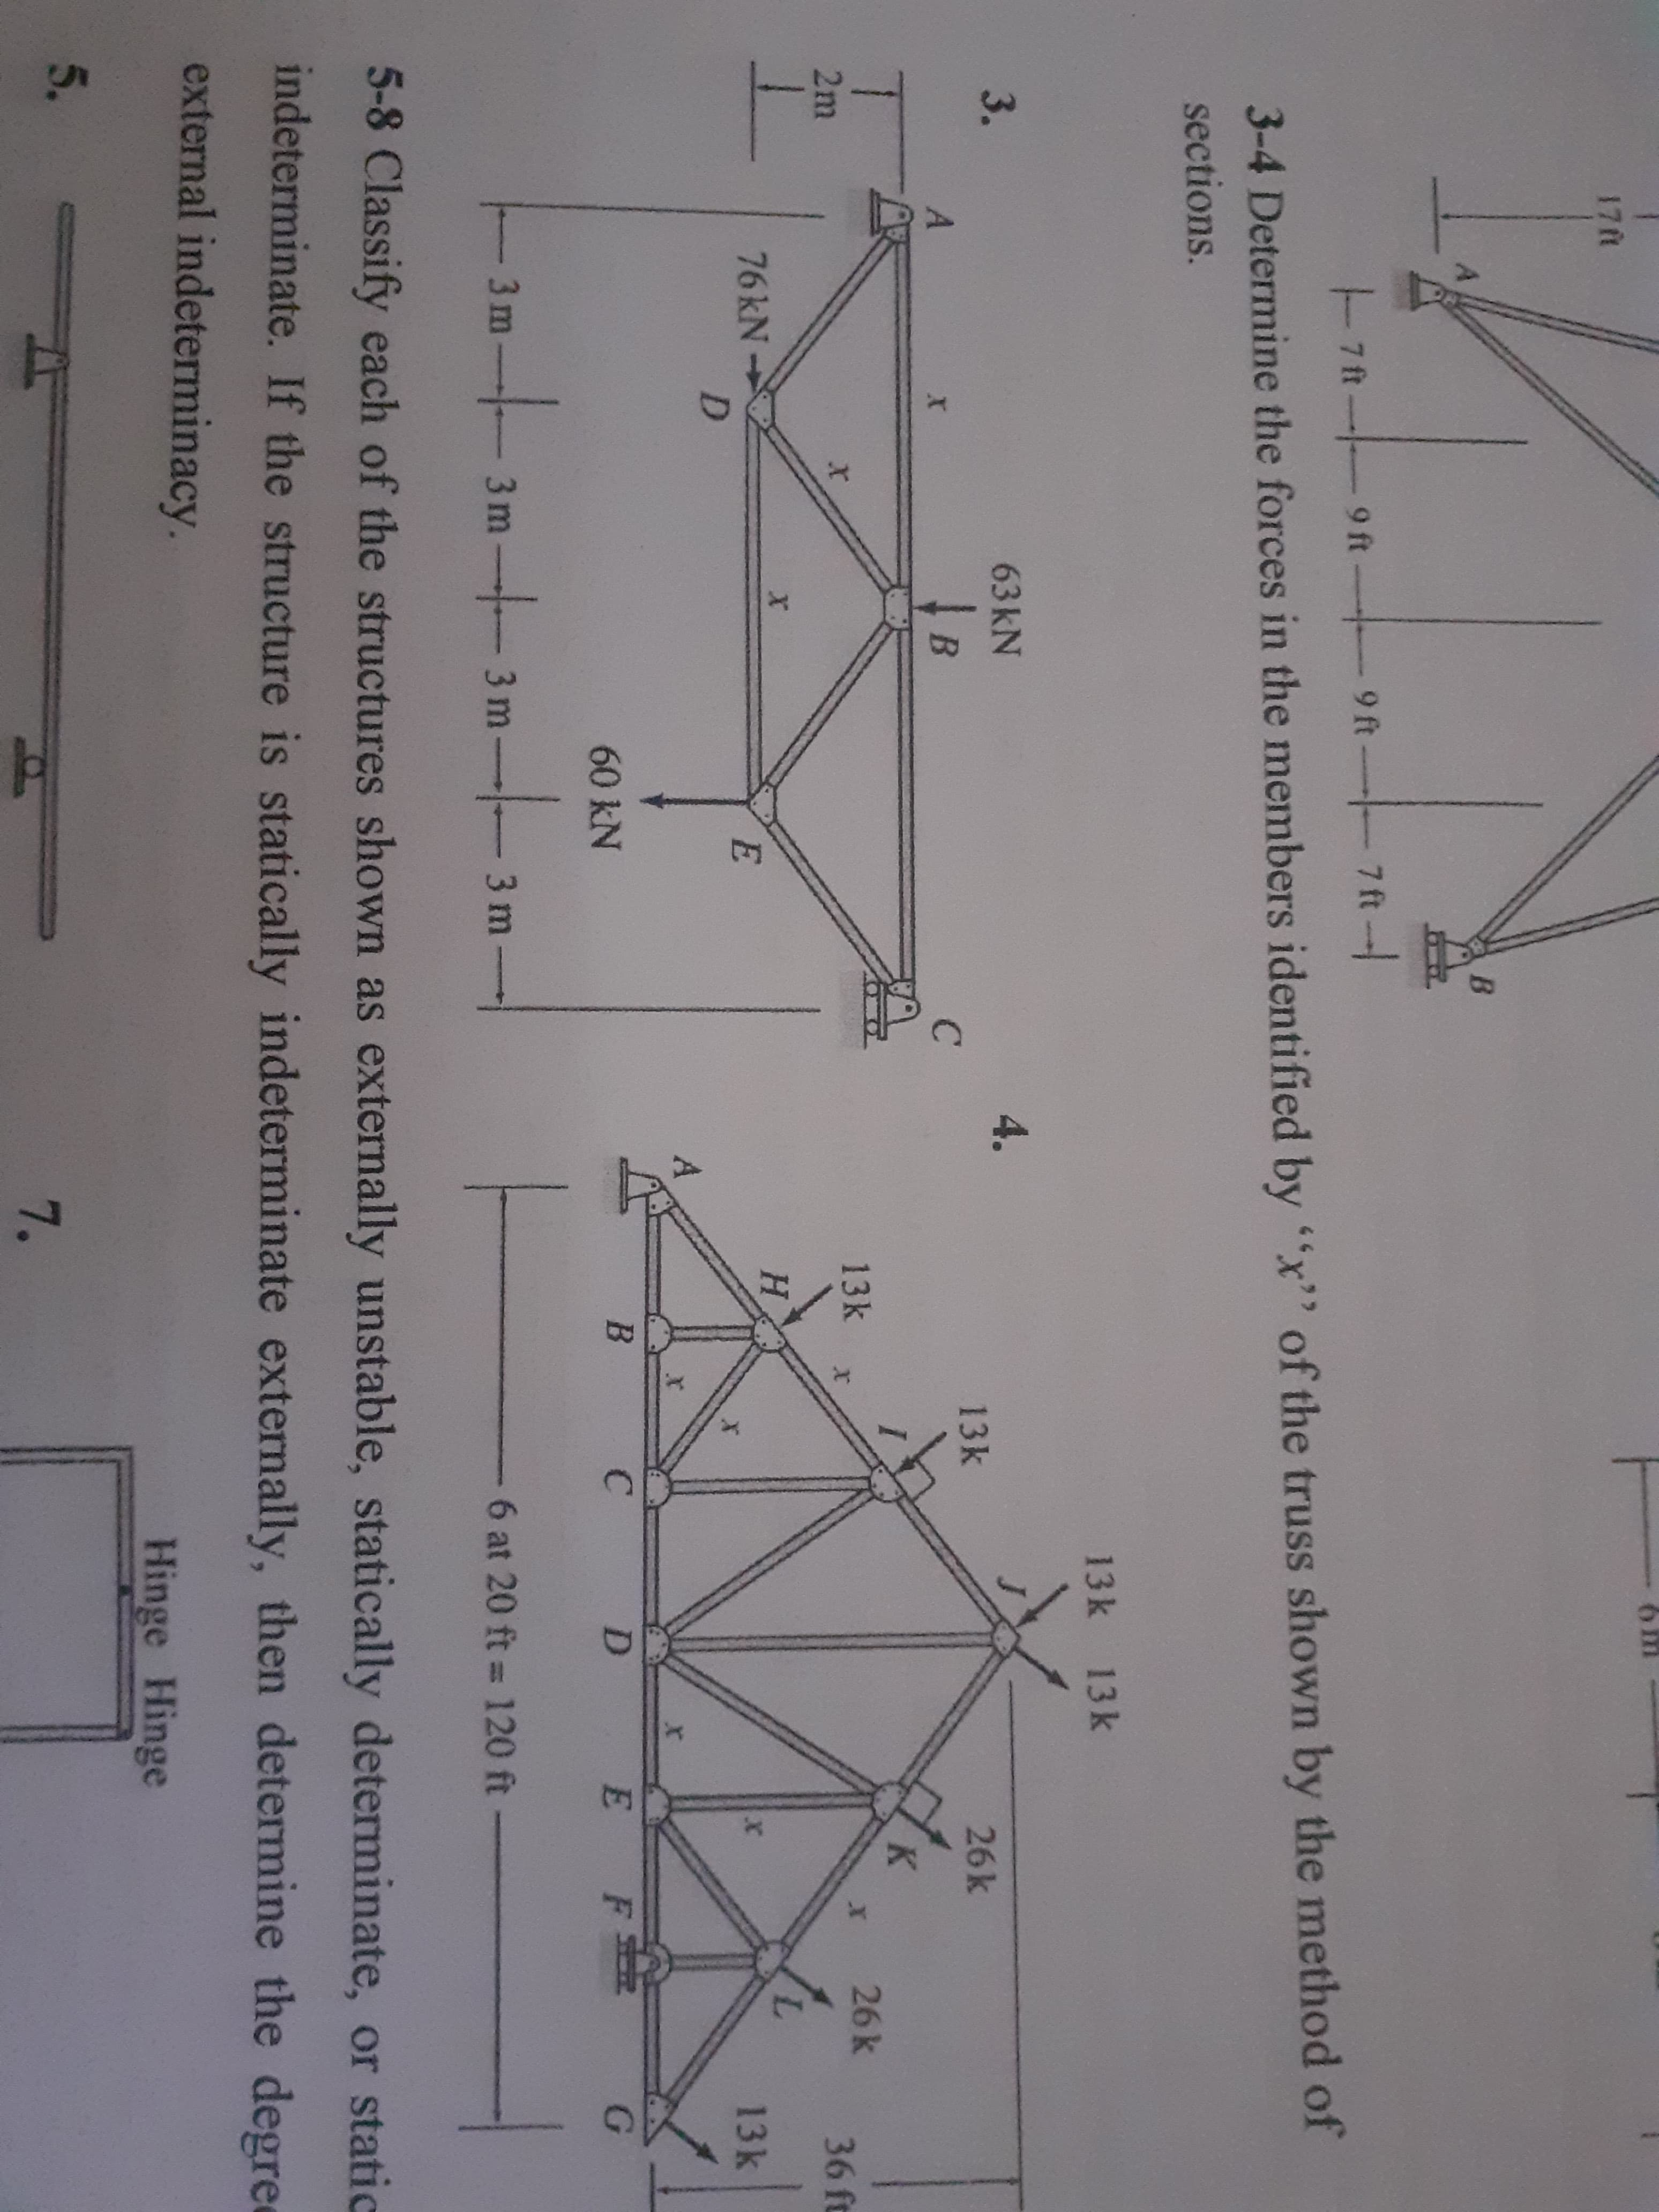 3-4 Determine the forces in the members identified by "x" of the truss shown by the method of
sections.
